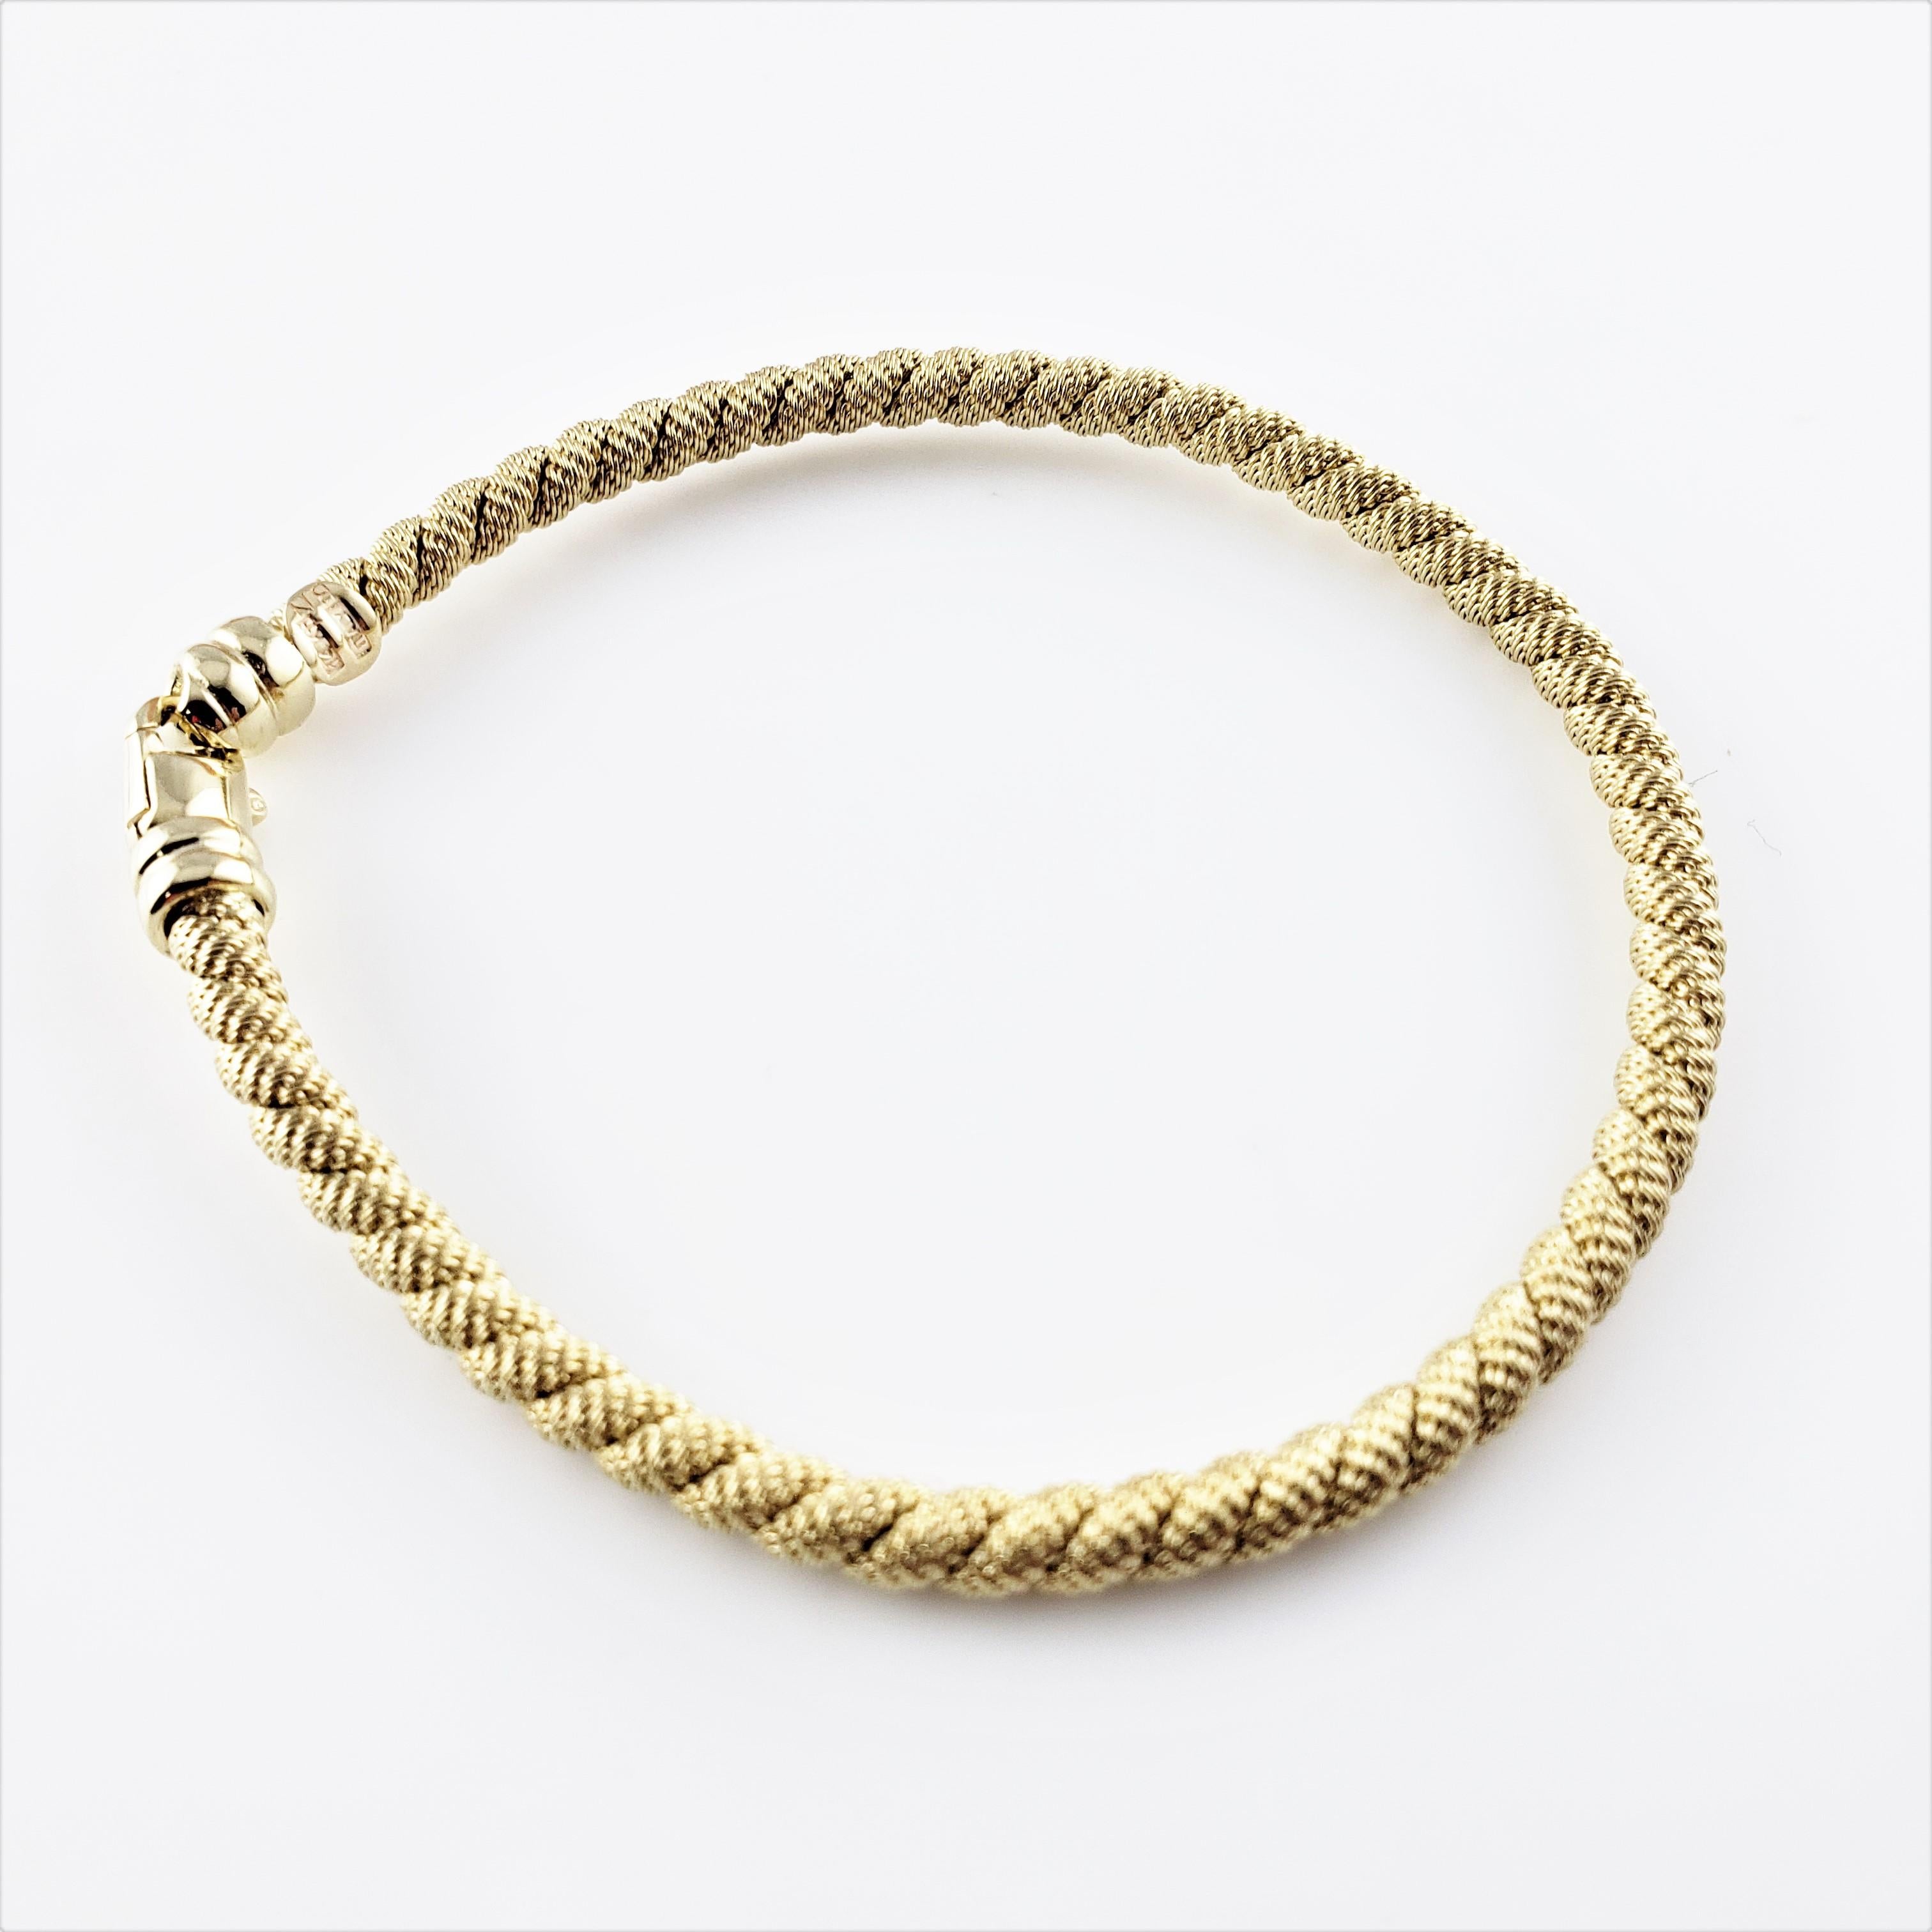 14 Karat Yellow Gold Cable Bracelet-

This elegant woven cable bracelet is crafted in beautifully detailed 14K yellow gold.  Width:  4 mm.

Size:  6.75 inches

Weight:  7.2 dwt. /  11.2 gr.

Stamped: 14K Italy BN

Very good condition, professionally